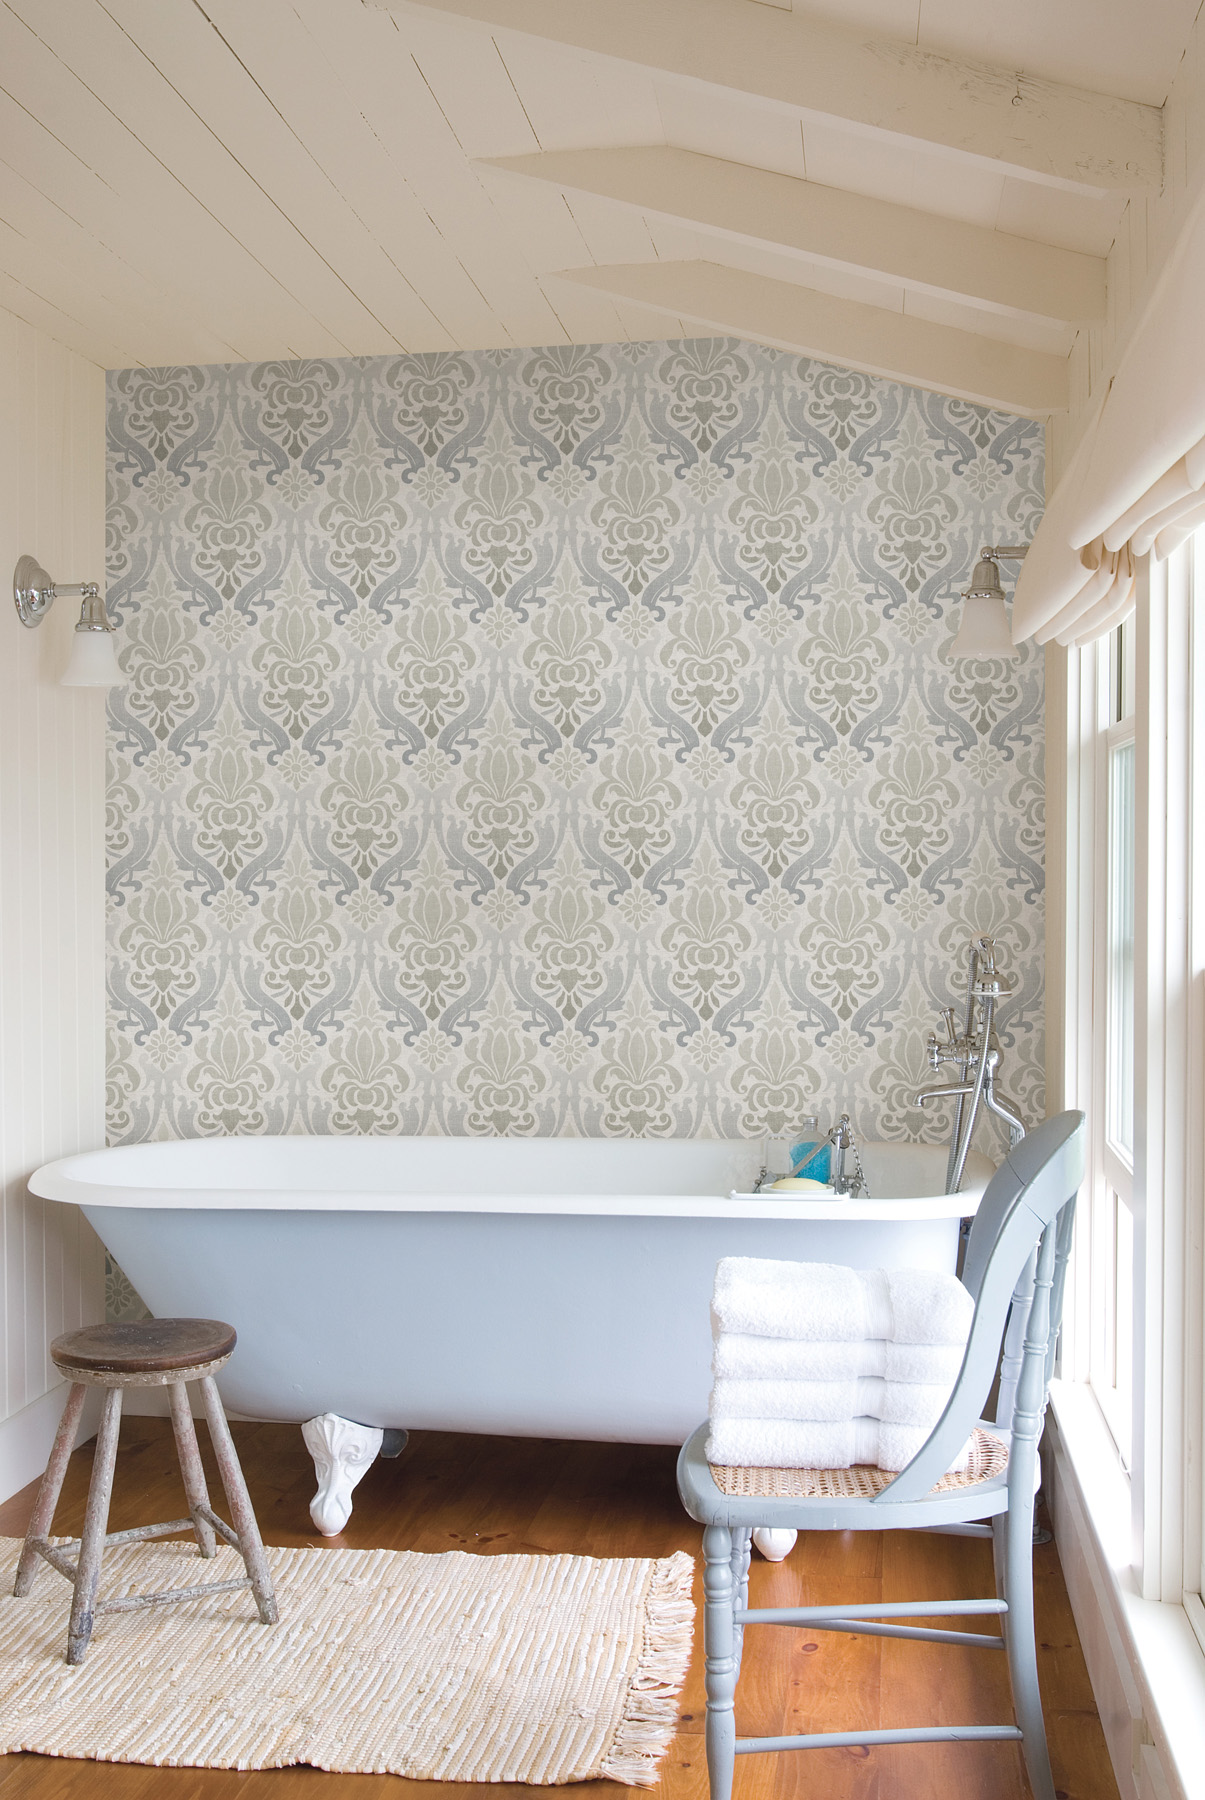 Blue Damask wallpaper feature wall in a bathroom with a clawfoot tub